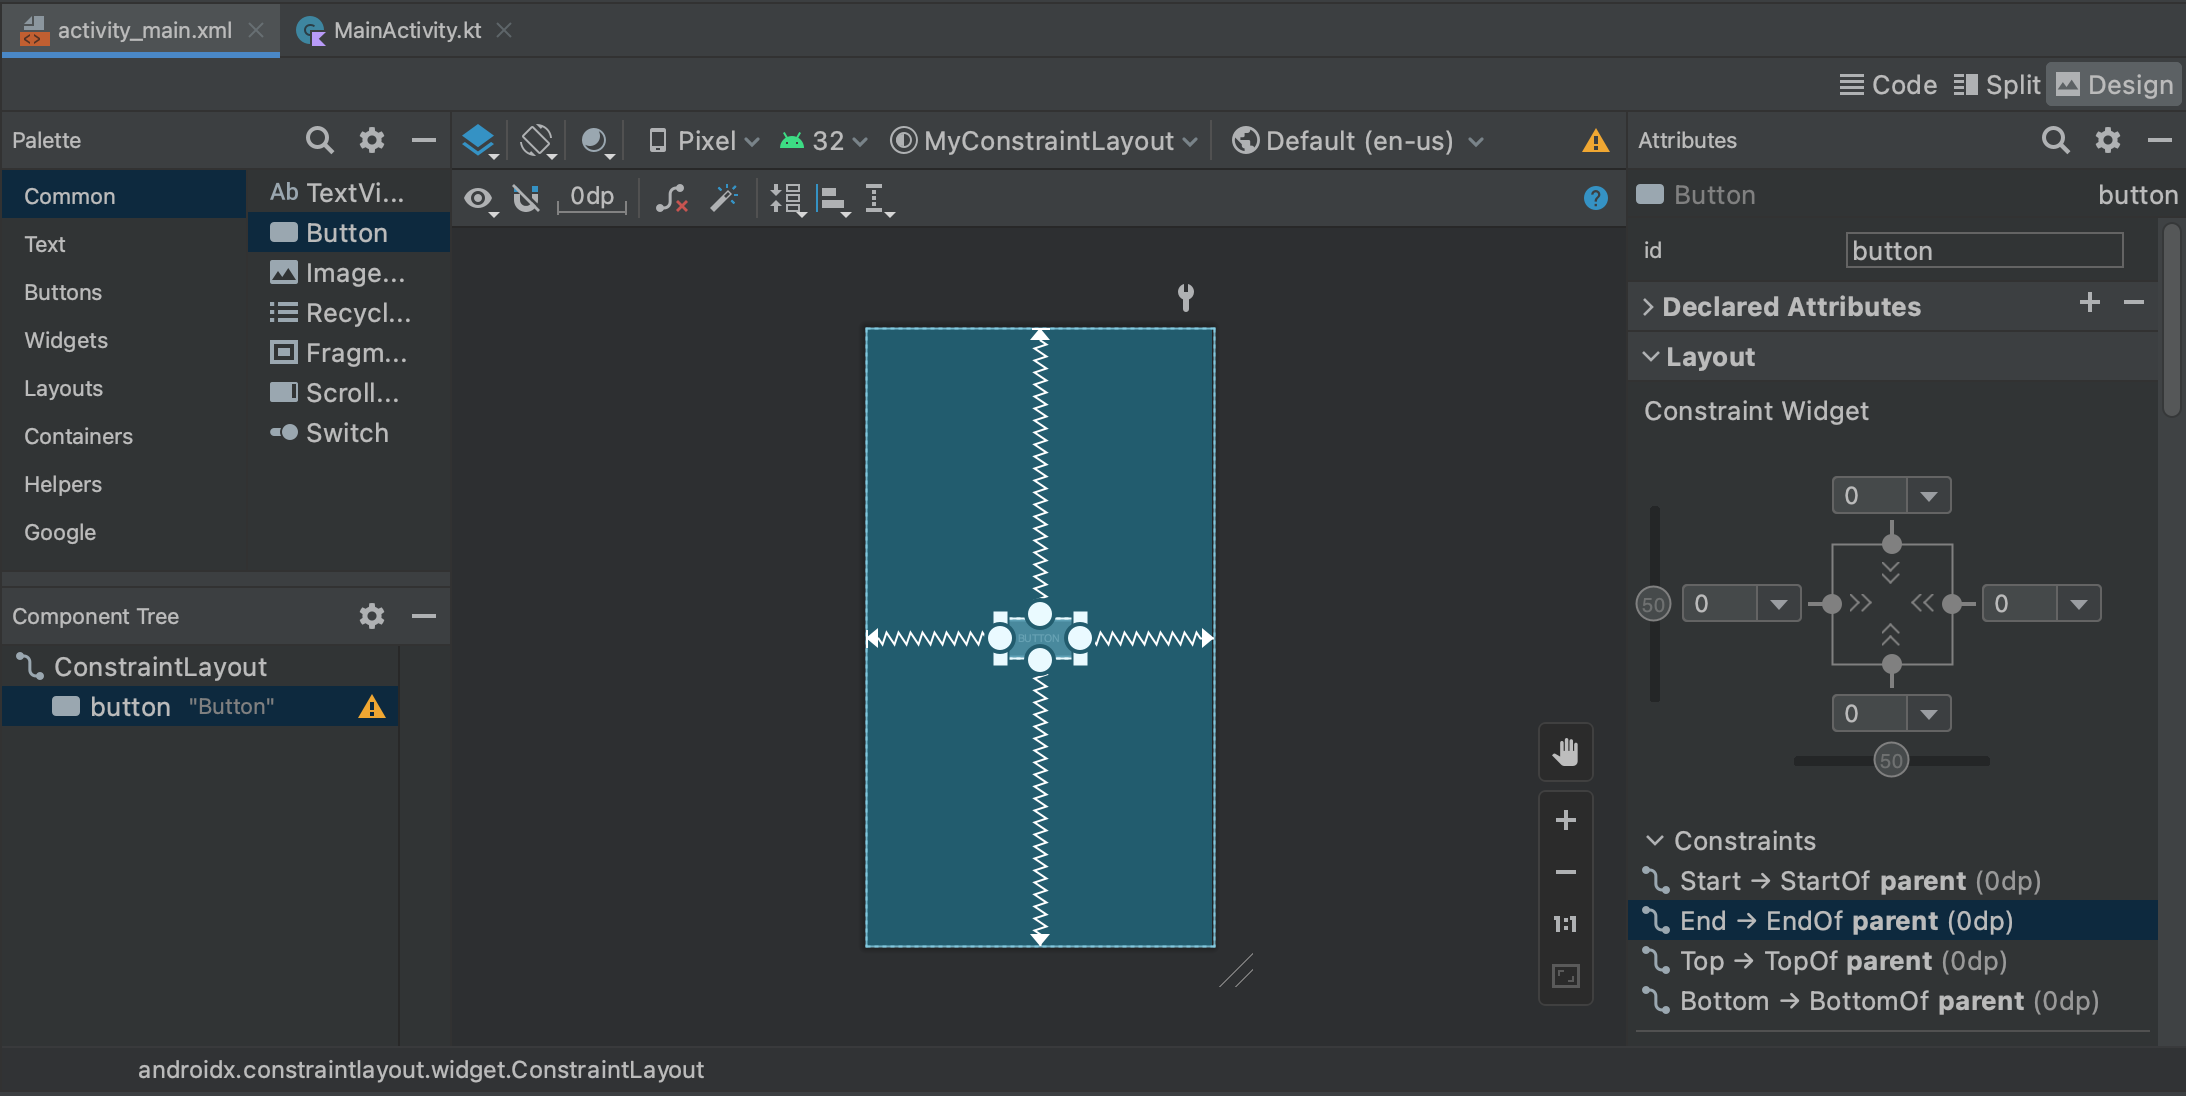 Android Studio design view with constraints